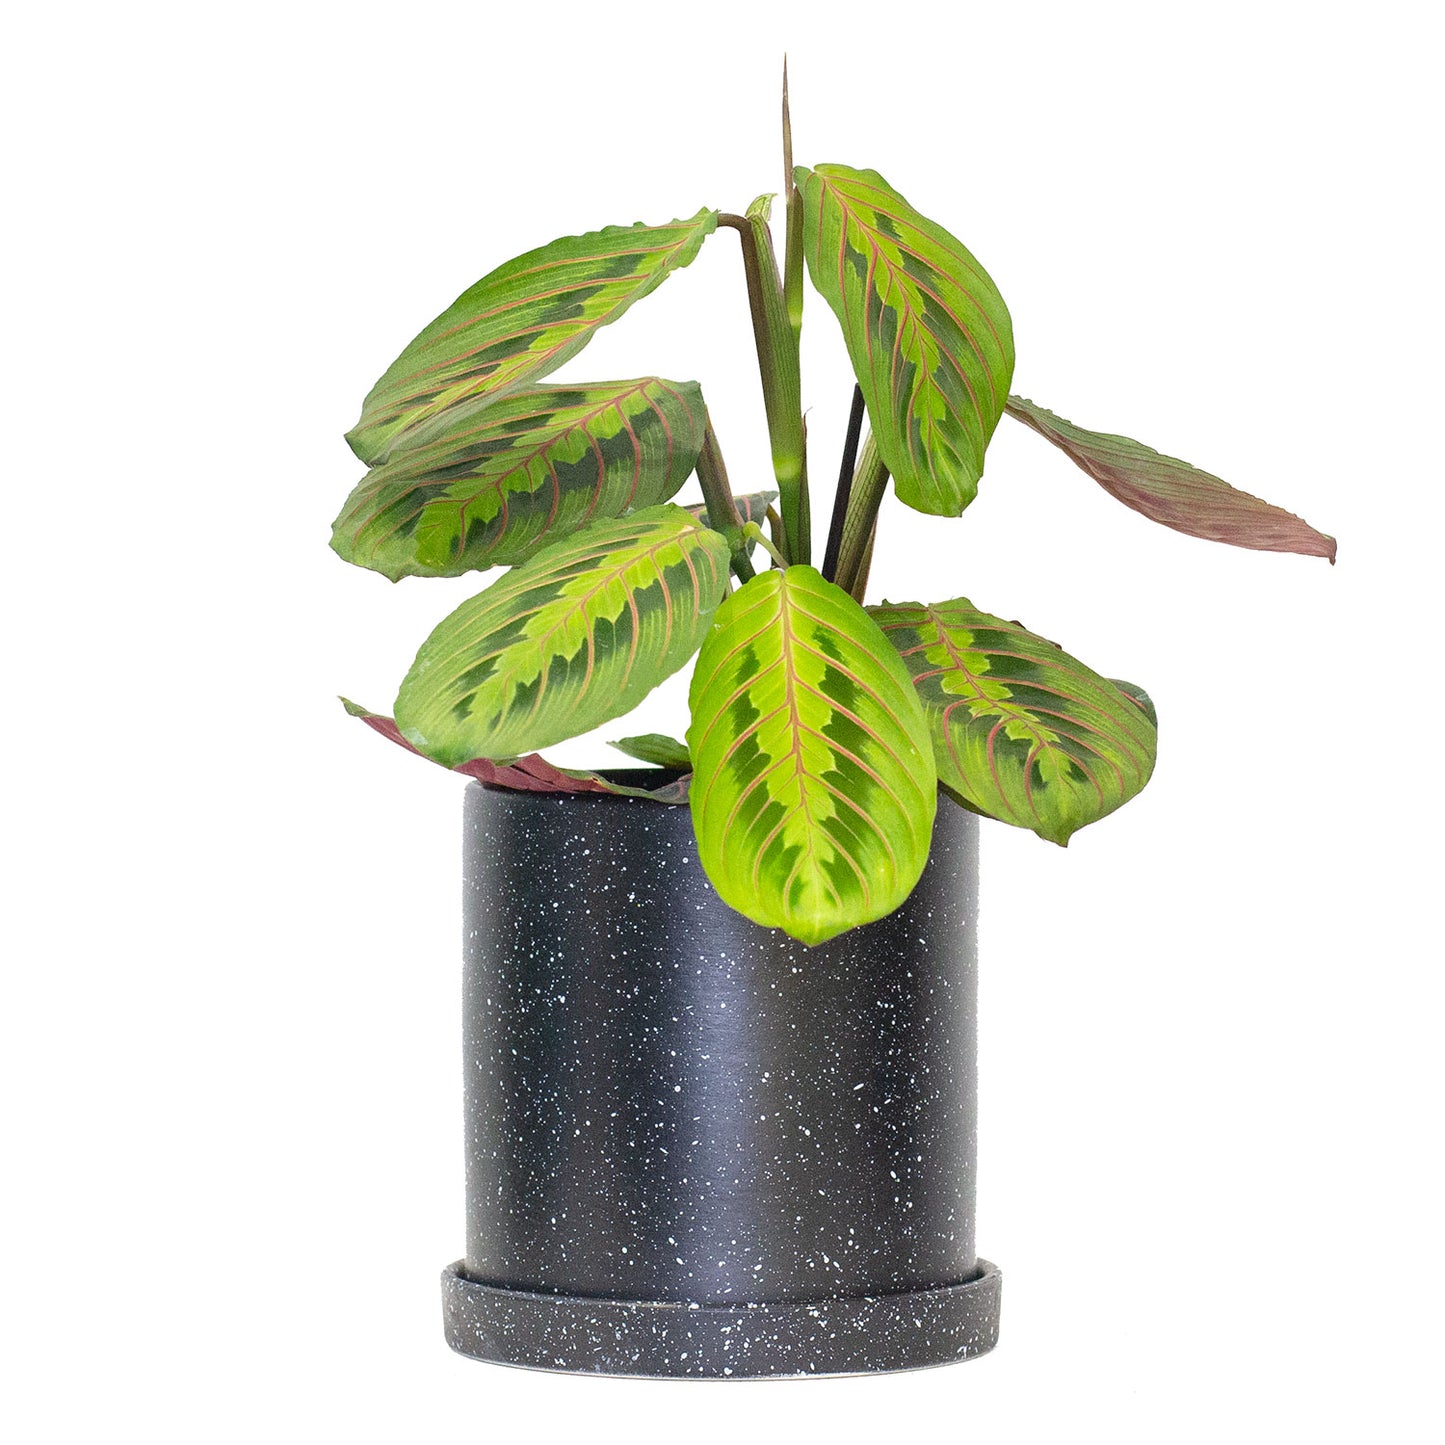 Set of Potted Easy-Care Lush Houseplants - Bundle of Lush Easy-Care Plants Philodendron Scandens Brasil & Chinese Evergreen & Maranta Tricolor 6” - Buy set of repotted easy-care indoor plants for delivery at Planteia